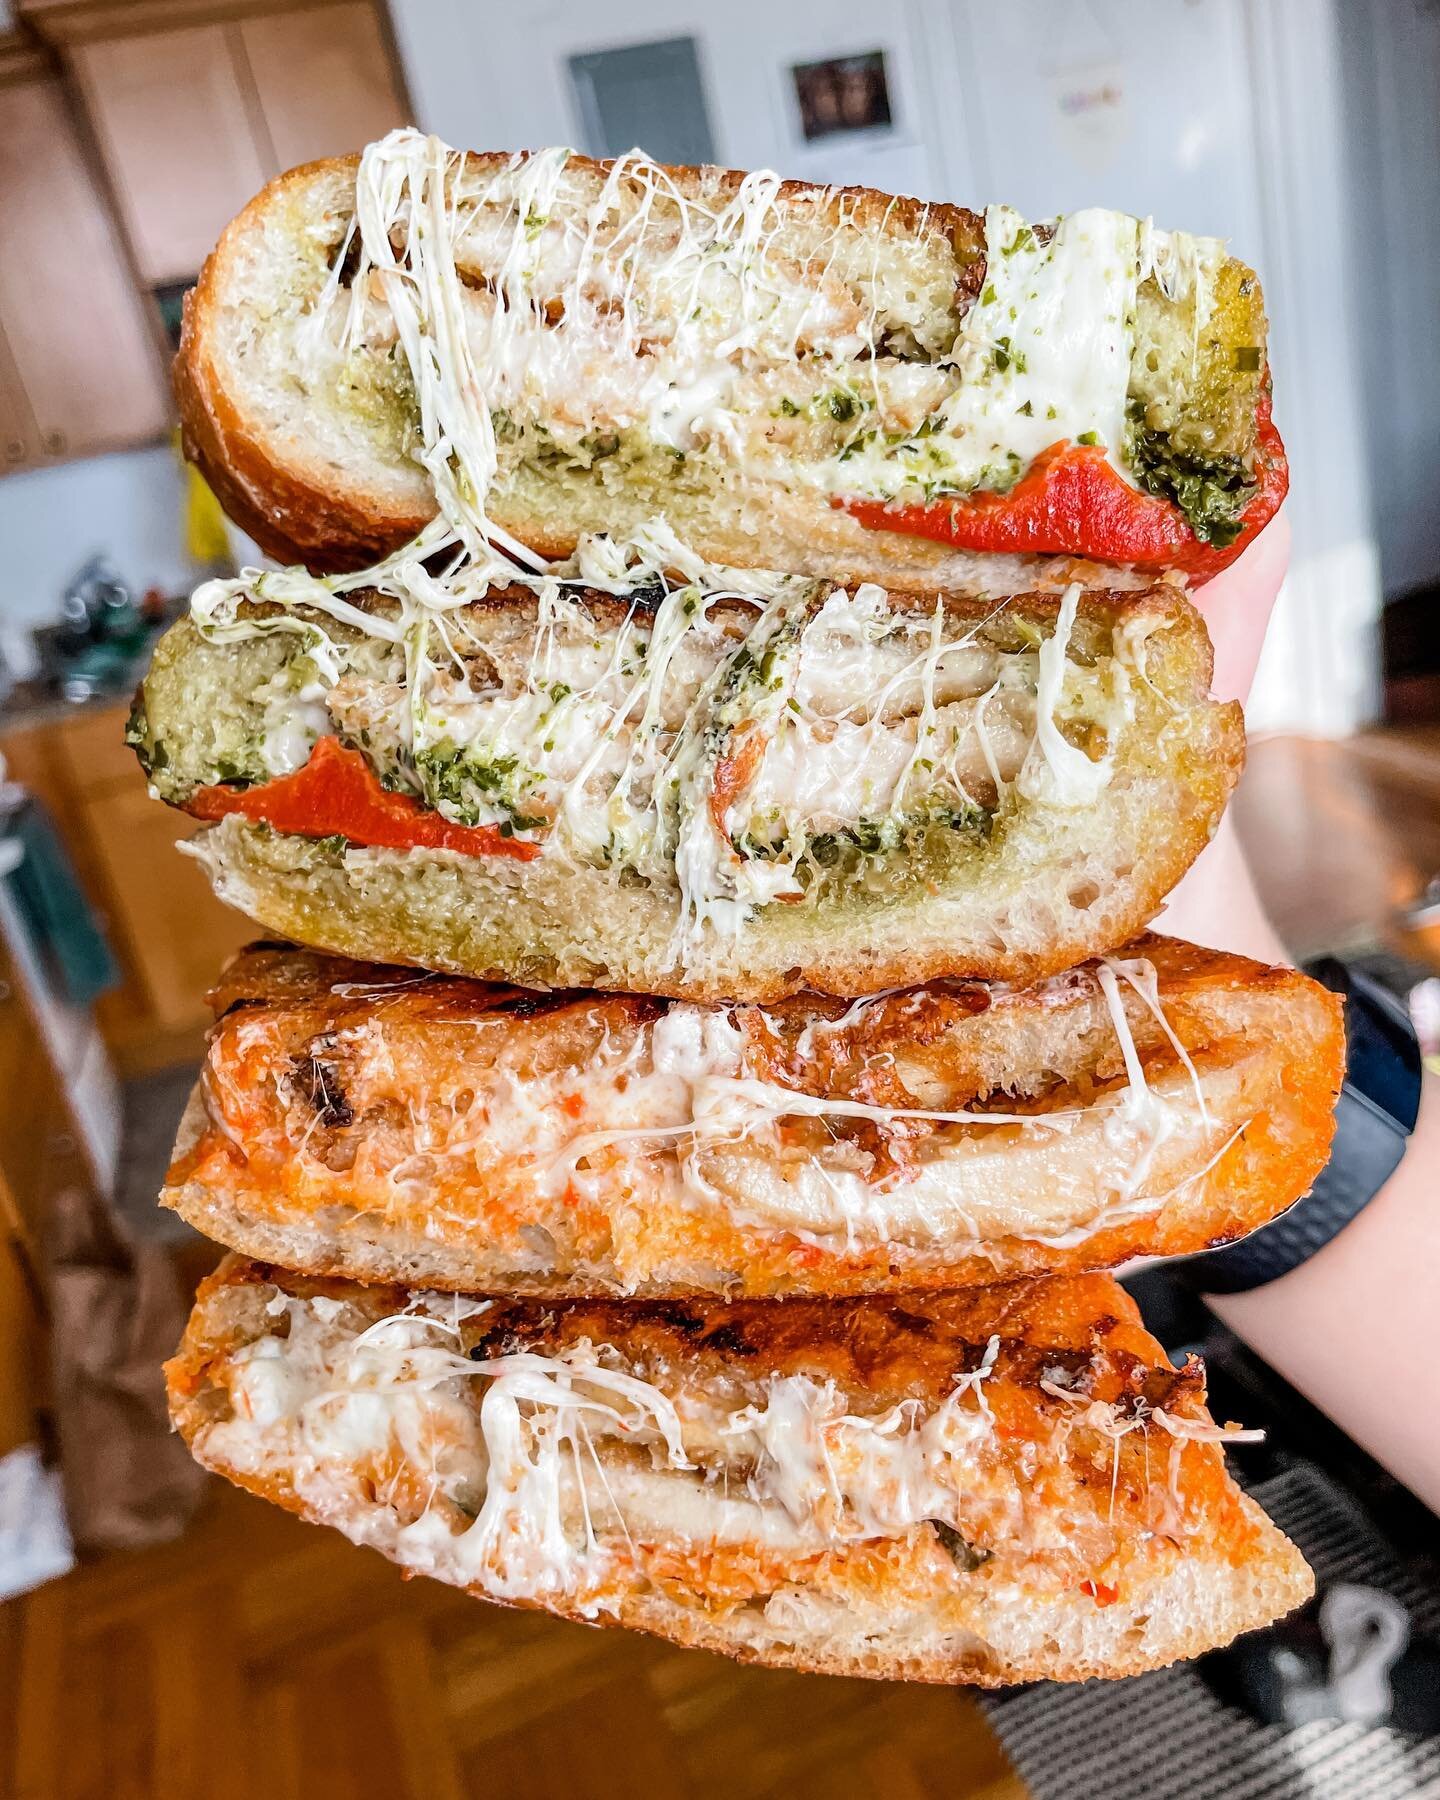 If you can&rsquo;t tell, I&rsquo;ve been on a big sandwich kick lately, and these paninis from @bnaporkstore were an excellent way to continue the streak! 
Which one would you go for?
🔼Chicken Pesto &amp; Roasted Red Pepper
🔽Chicken Parm
.
.
.
.
.
